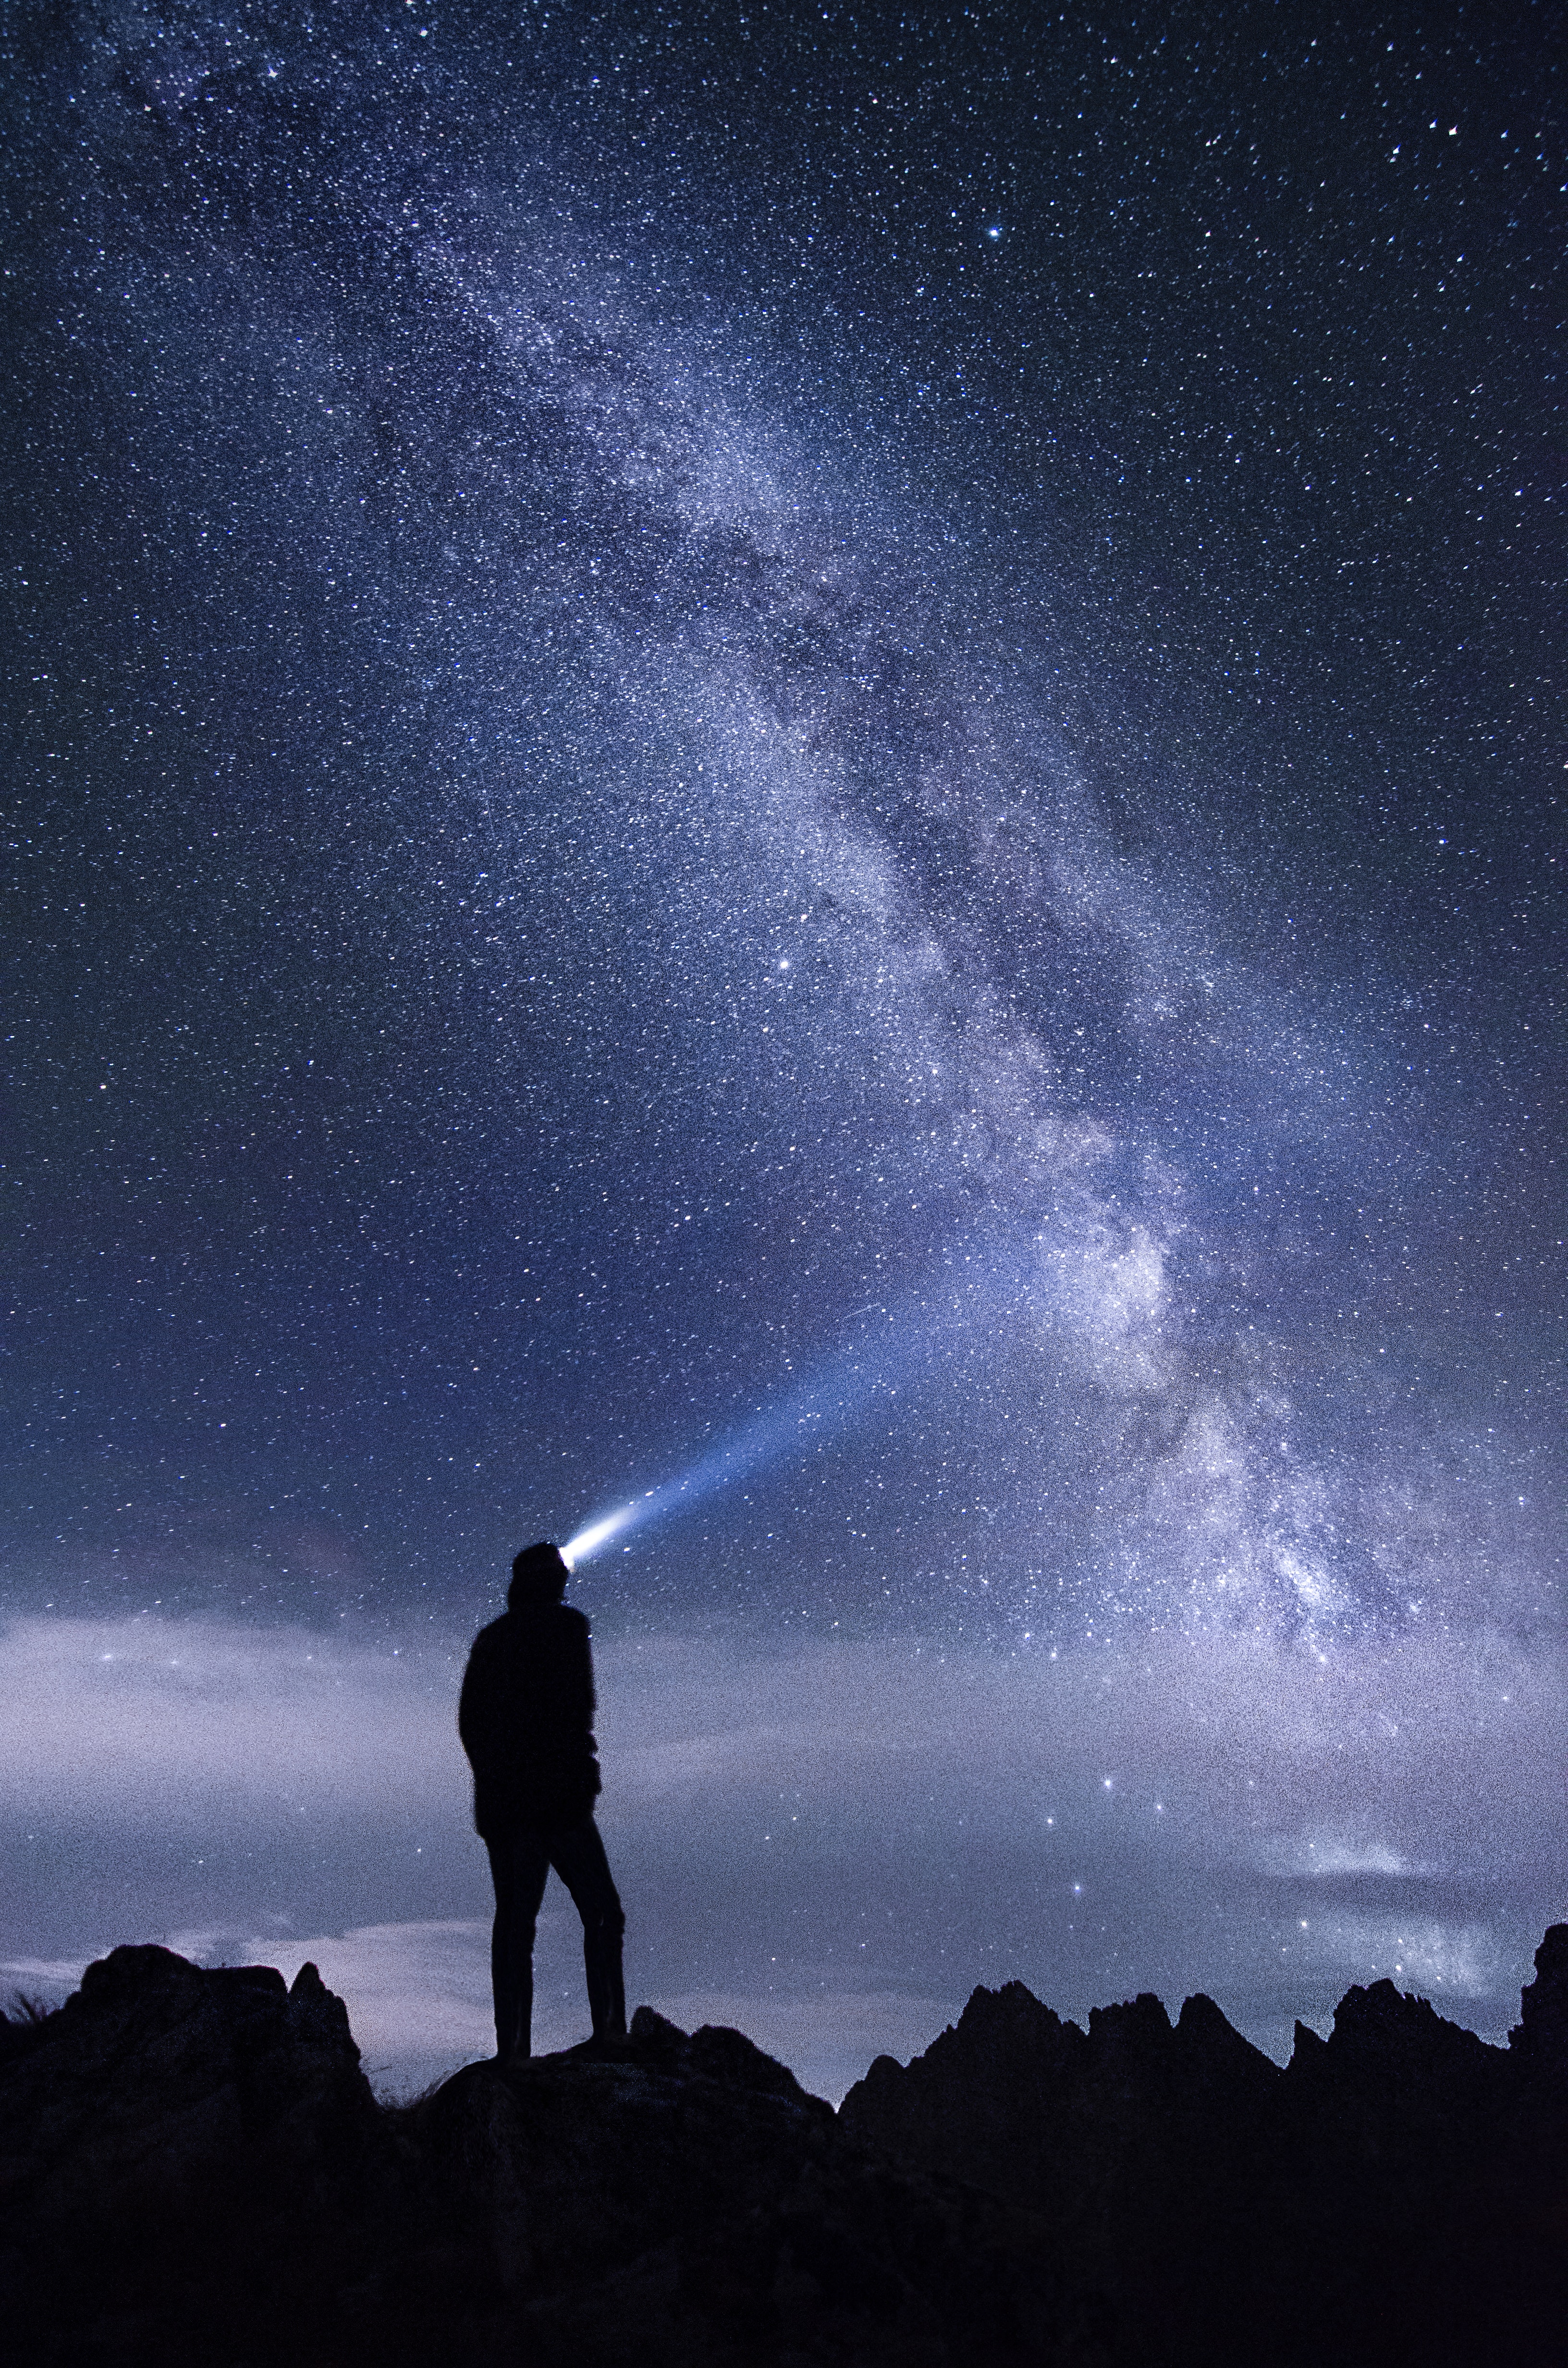 A person is silhouetted standing on top of a jagged ridge with their headlamp shining skyward. The Milky Way blazes bright across a star filled sky.